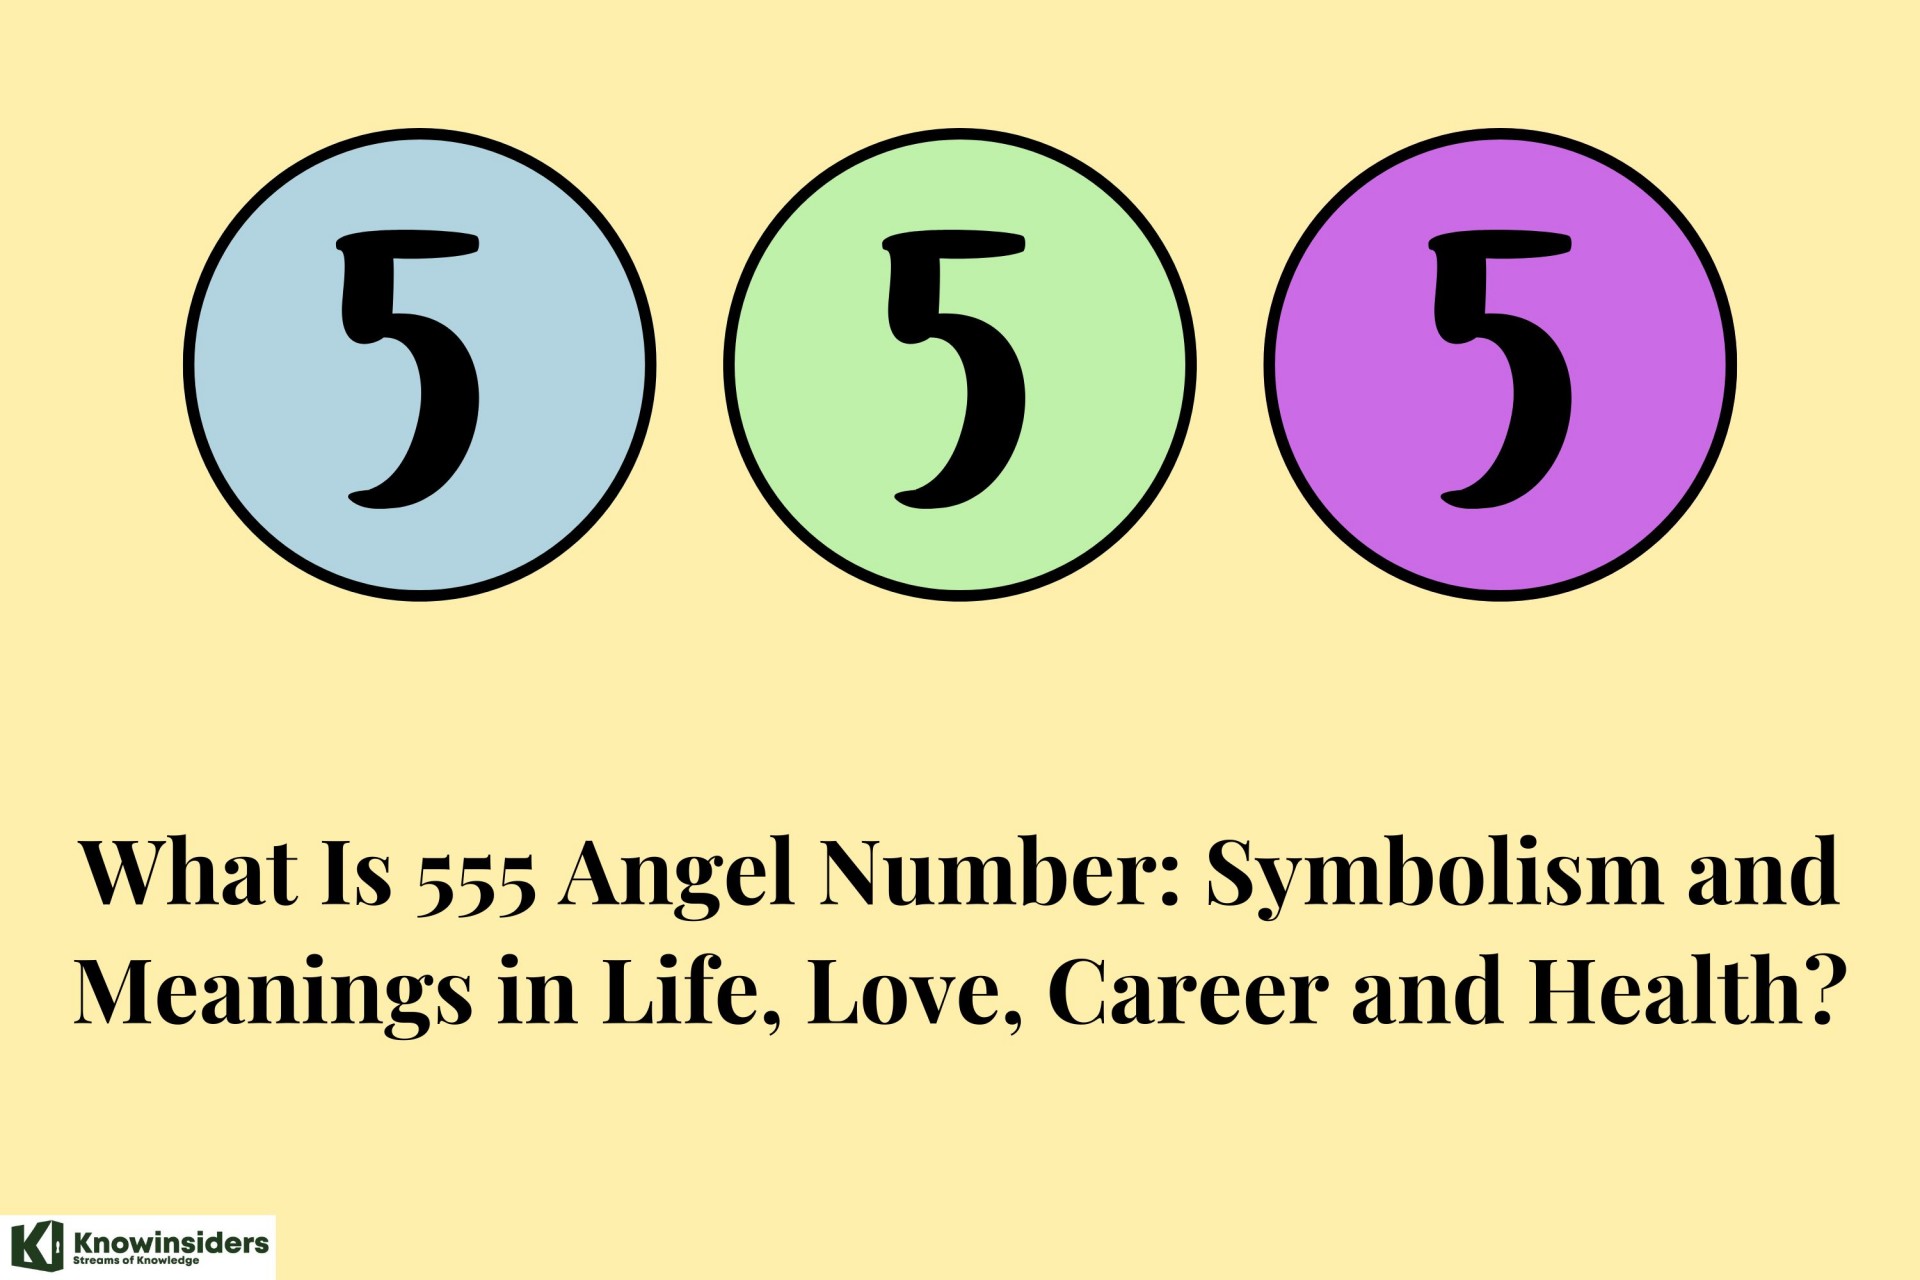 What Is 555 Angel Number: Symbolism and Meanings in Life, Love, Career and Health?